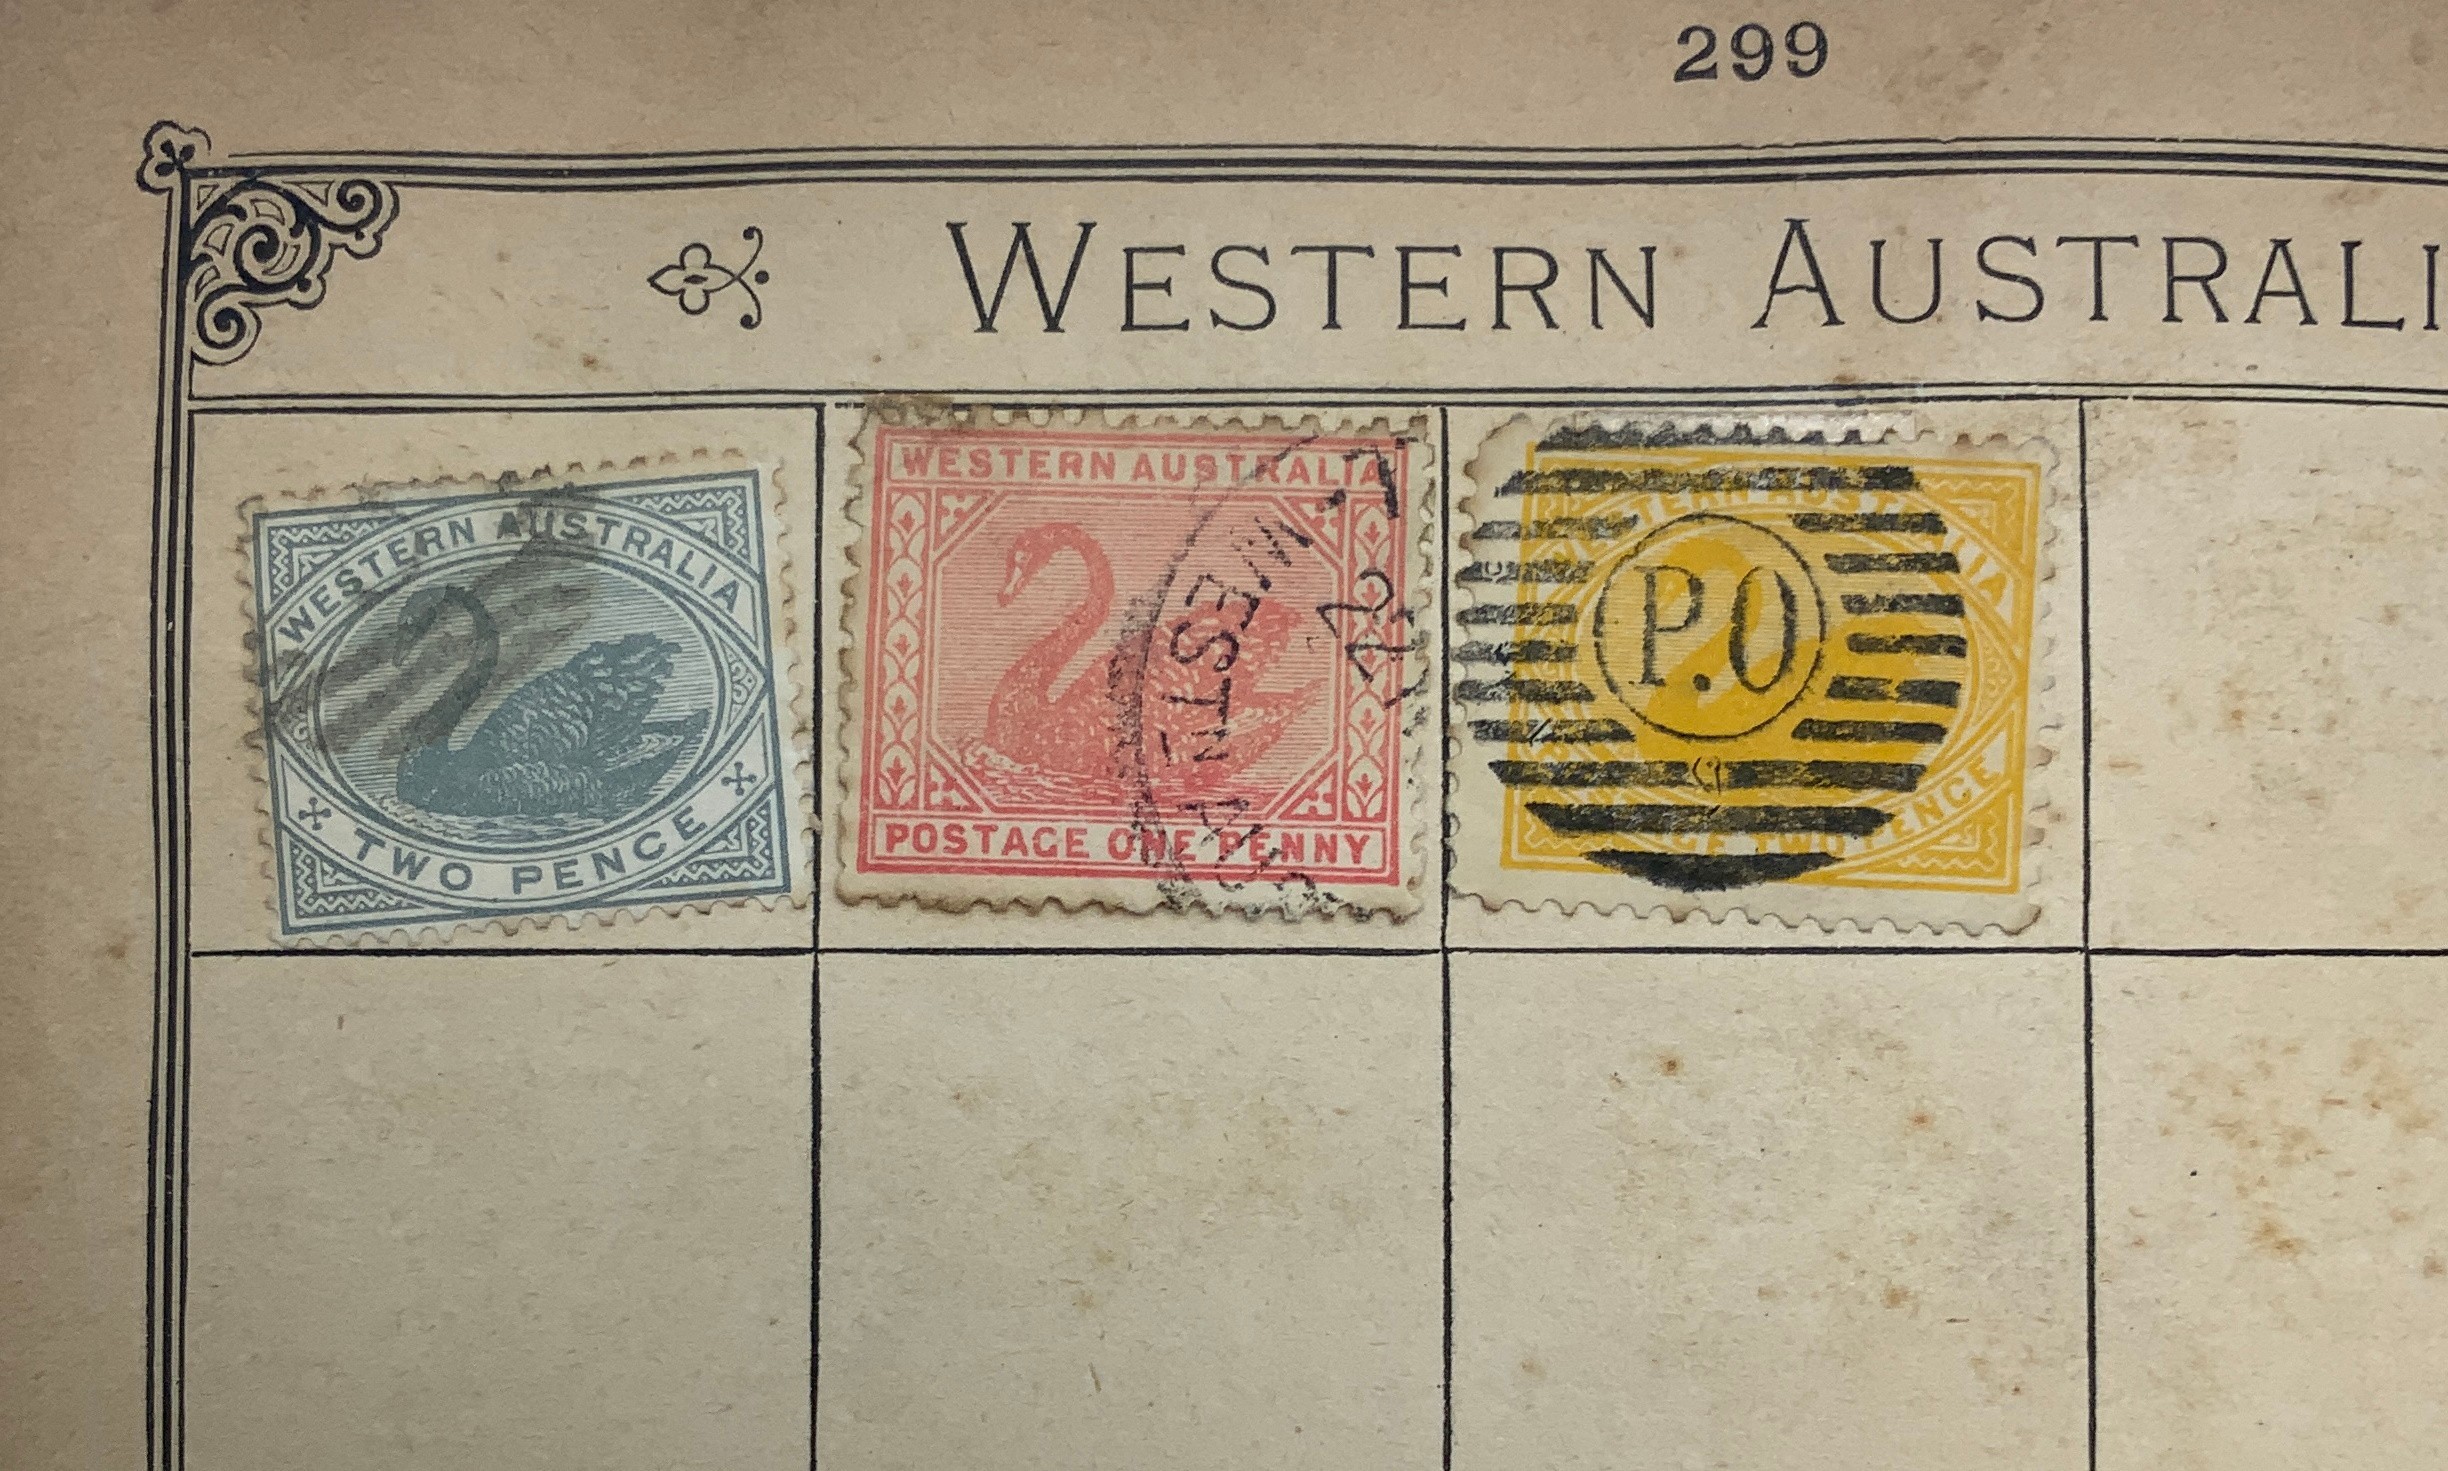 SELECTION OF VARIOUS STAMPS IN ALBUM, SOME LOOSE PAGES - Image 86 of 92